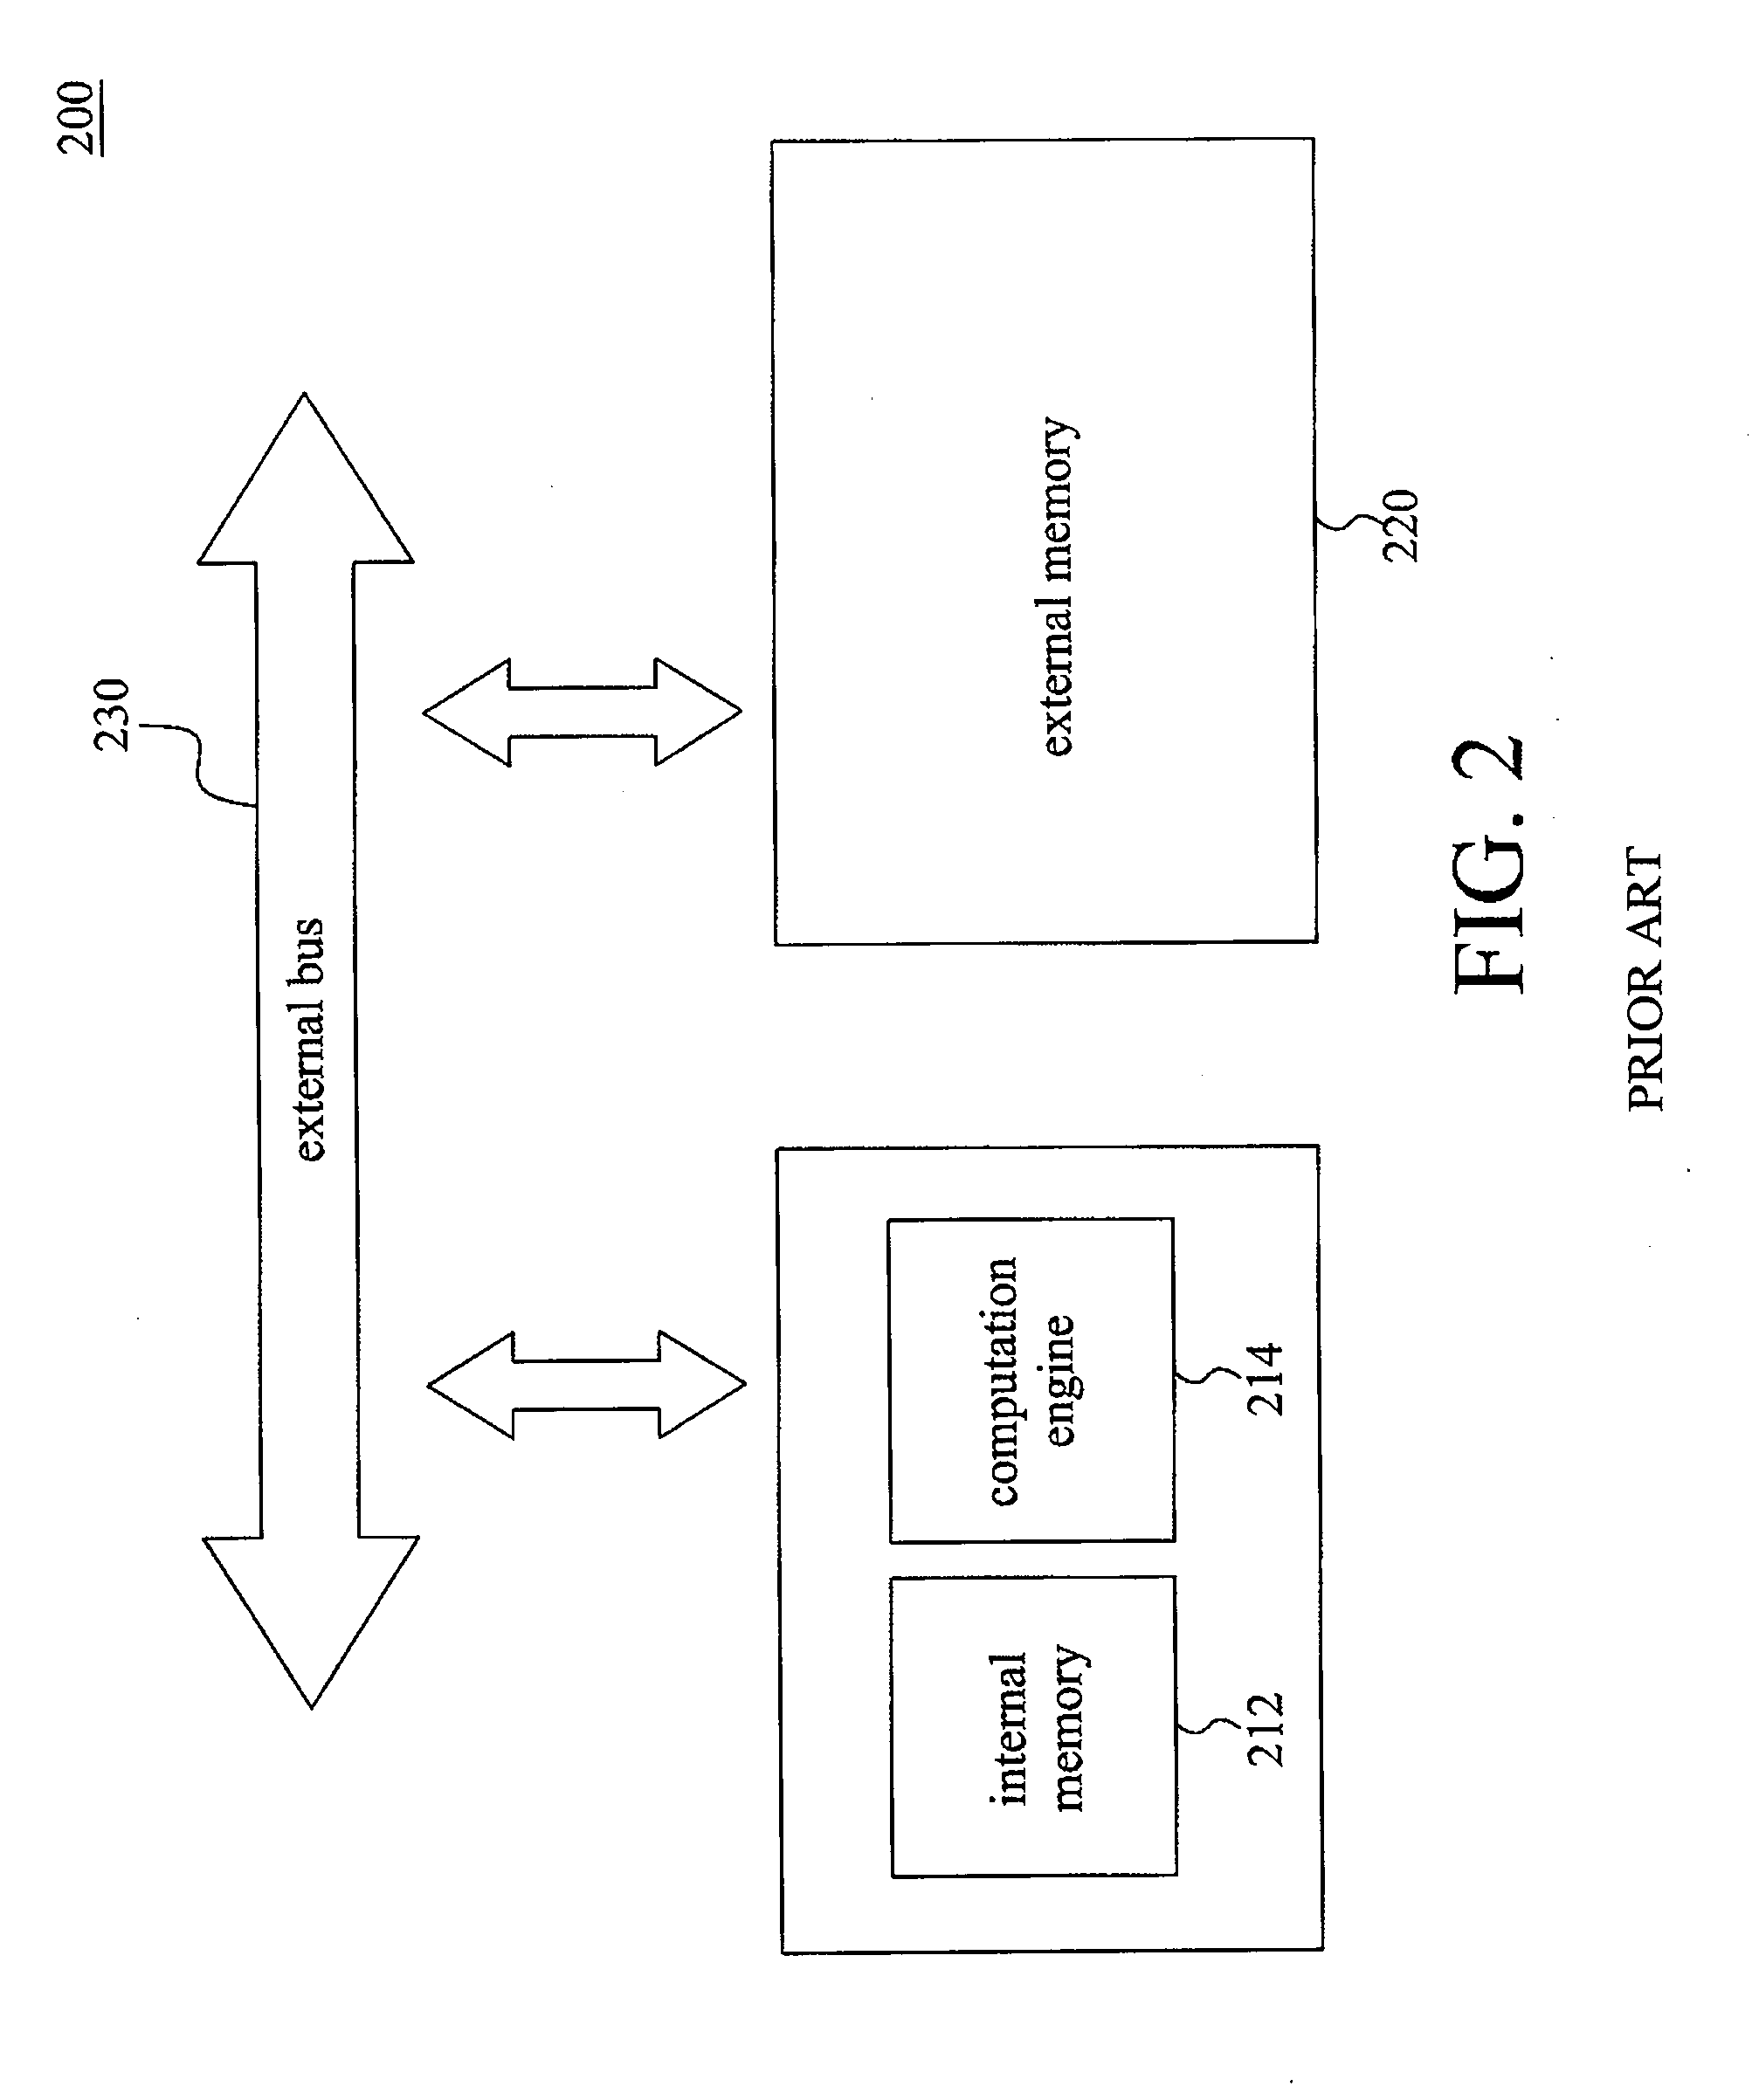 Low-power and high-performance video coding method for performing motion estimation